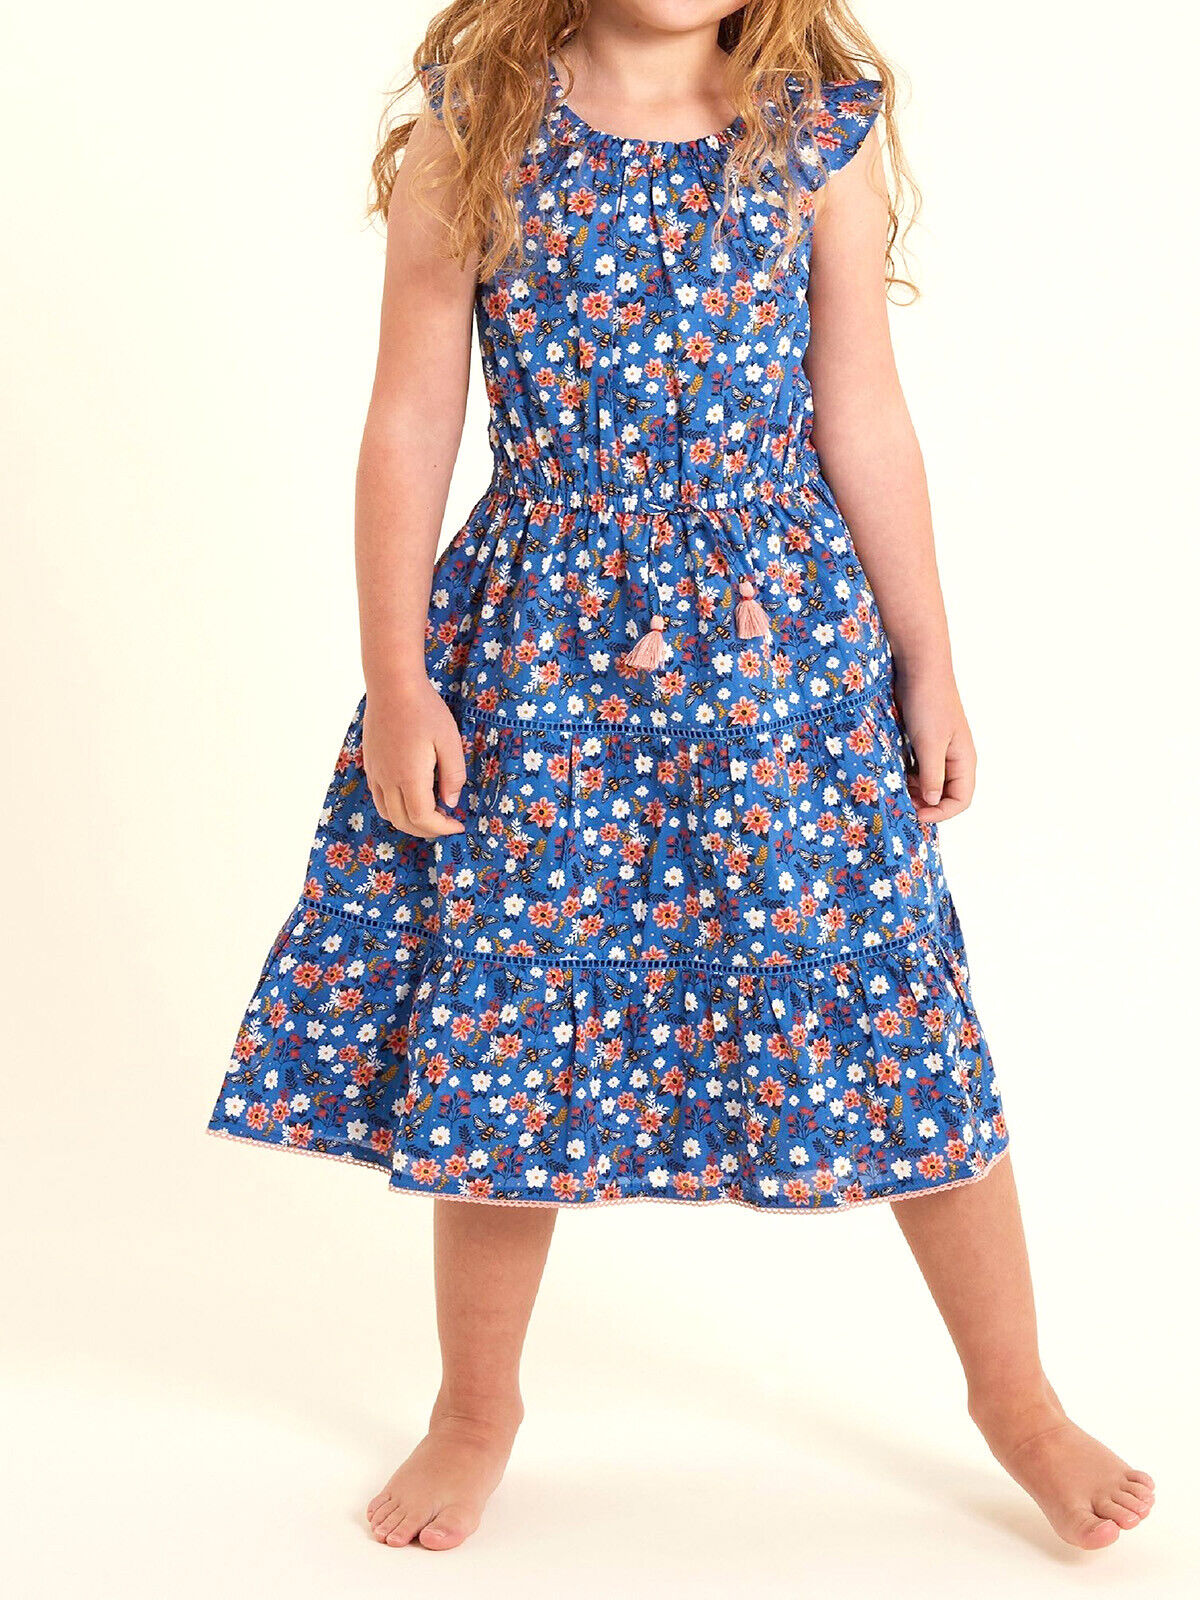 EX Fat Face Cobalt Girls Ruby Bee Print Maxi Dress 3-4 or 4-5 Years RRP £22.50